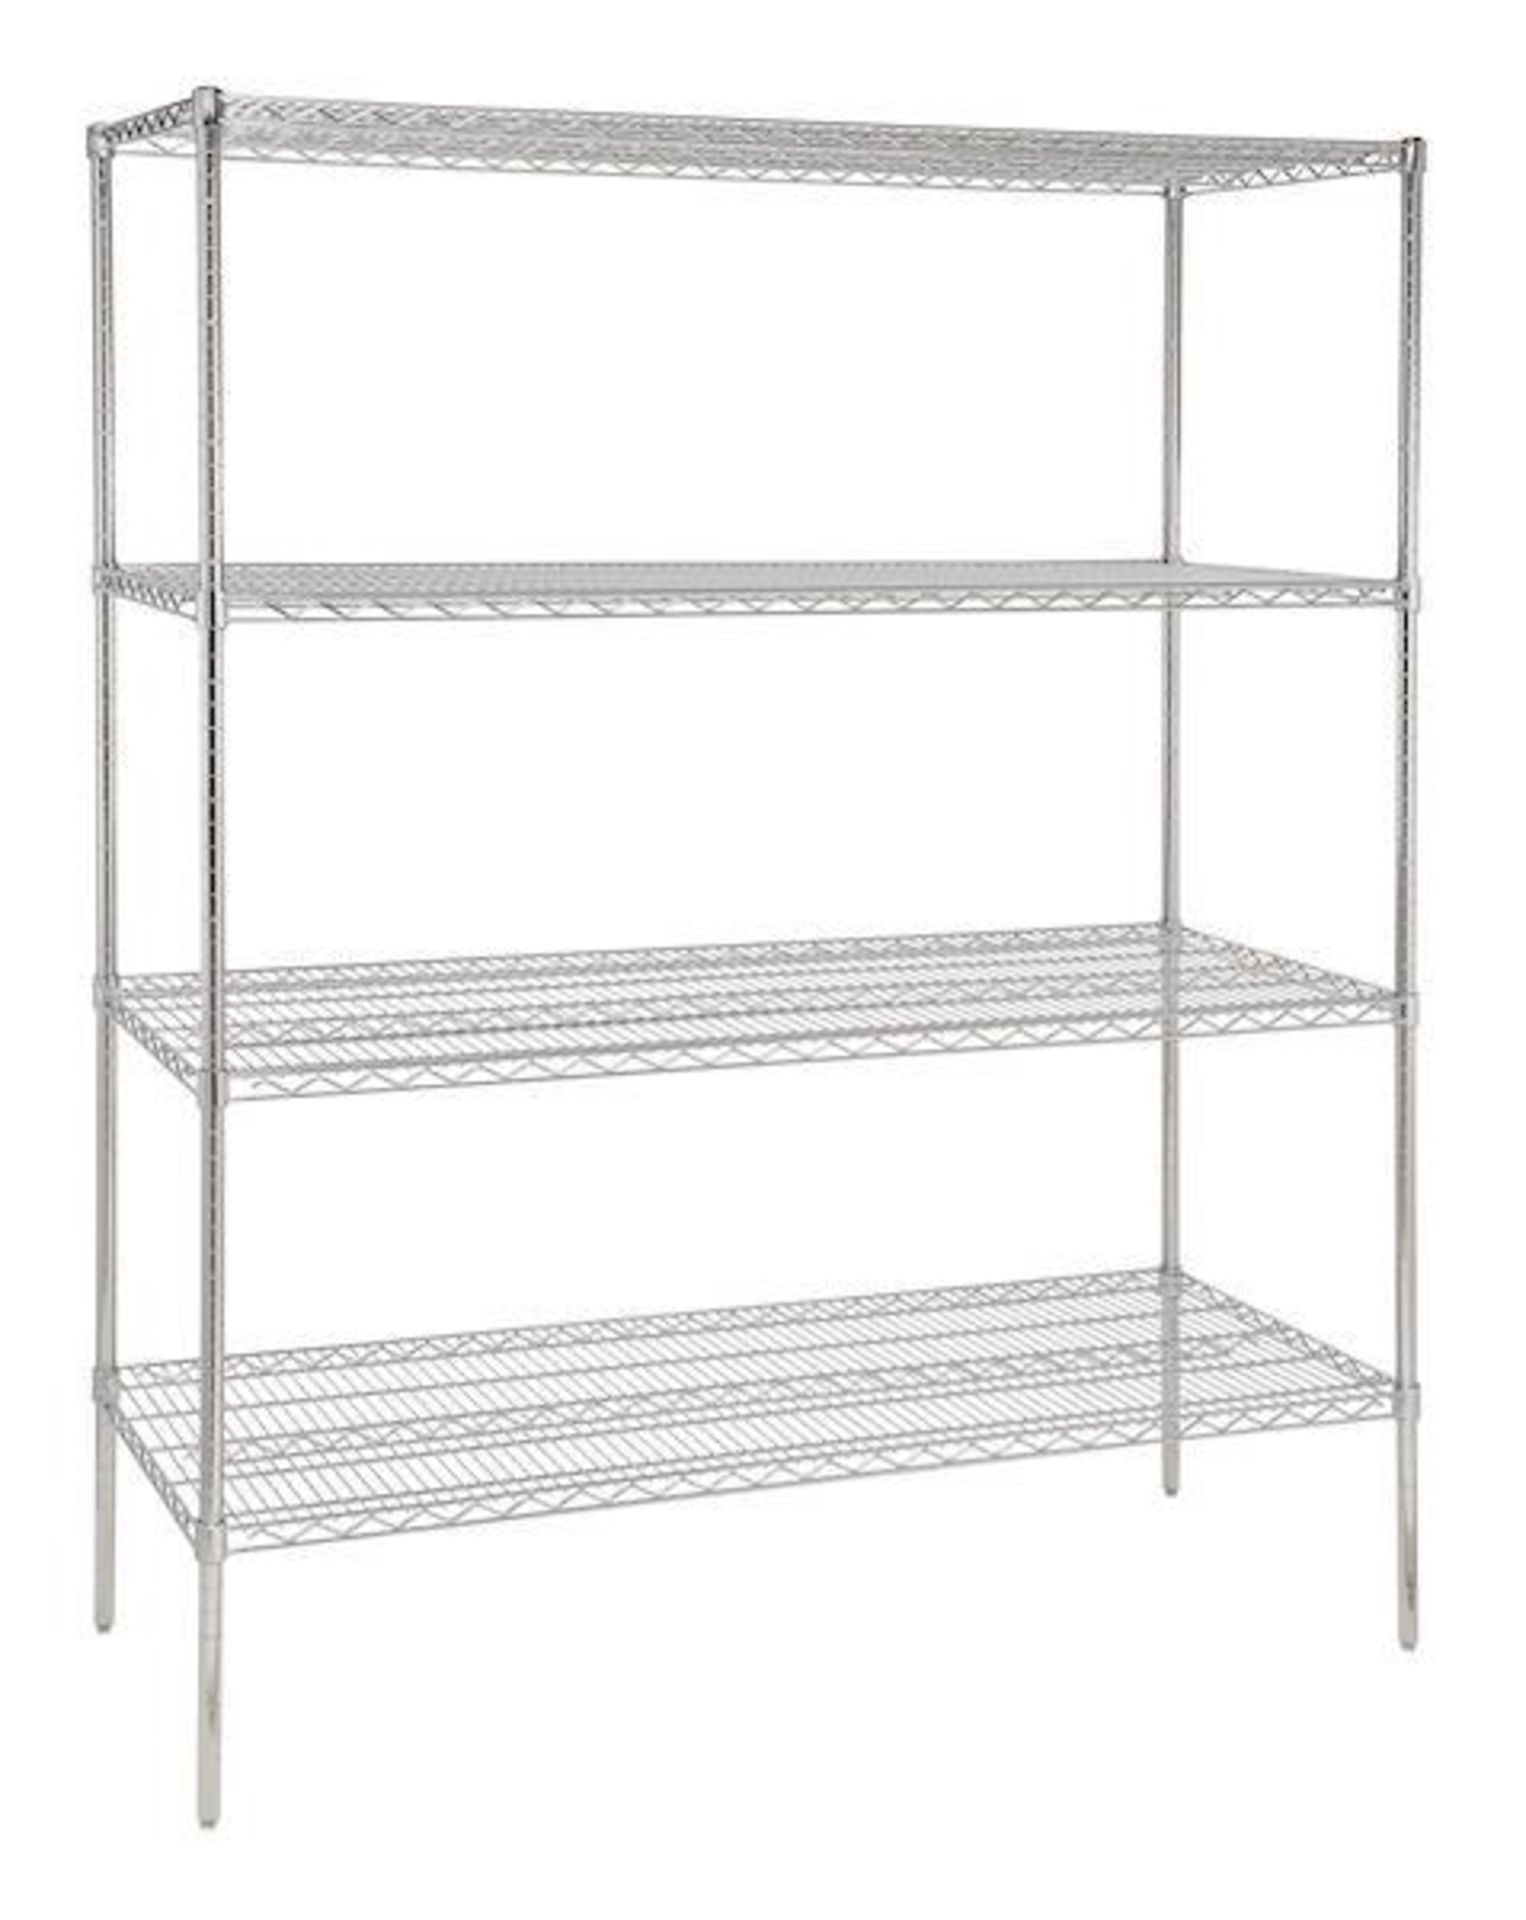 Stainless Steel Wire Rack 1829 mm length